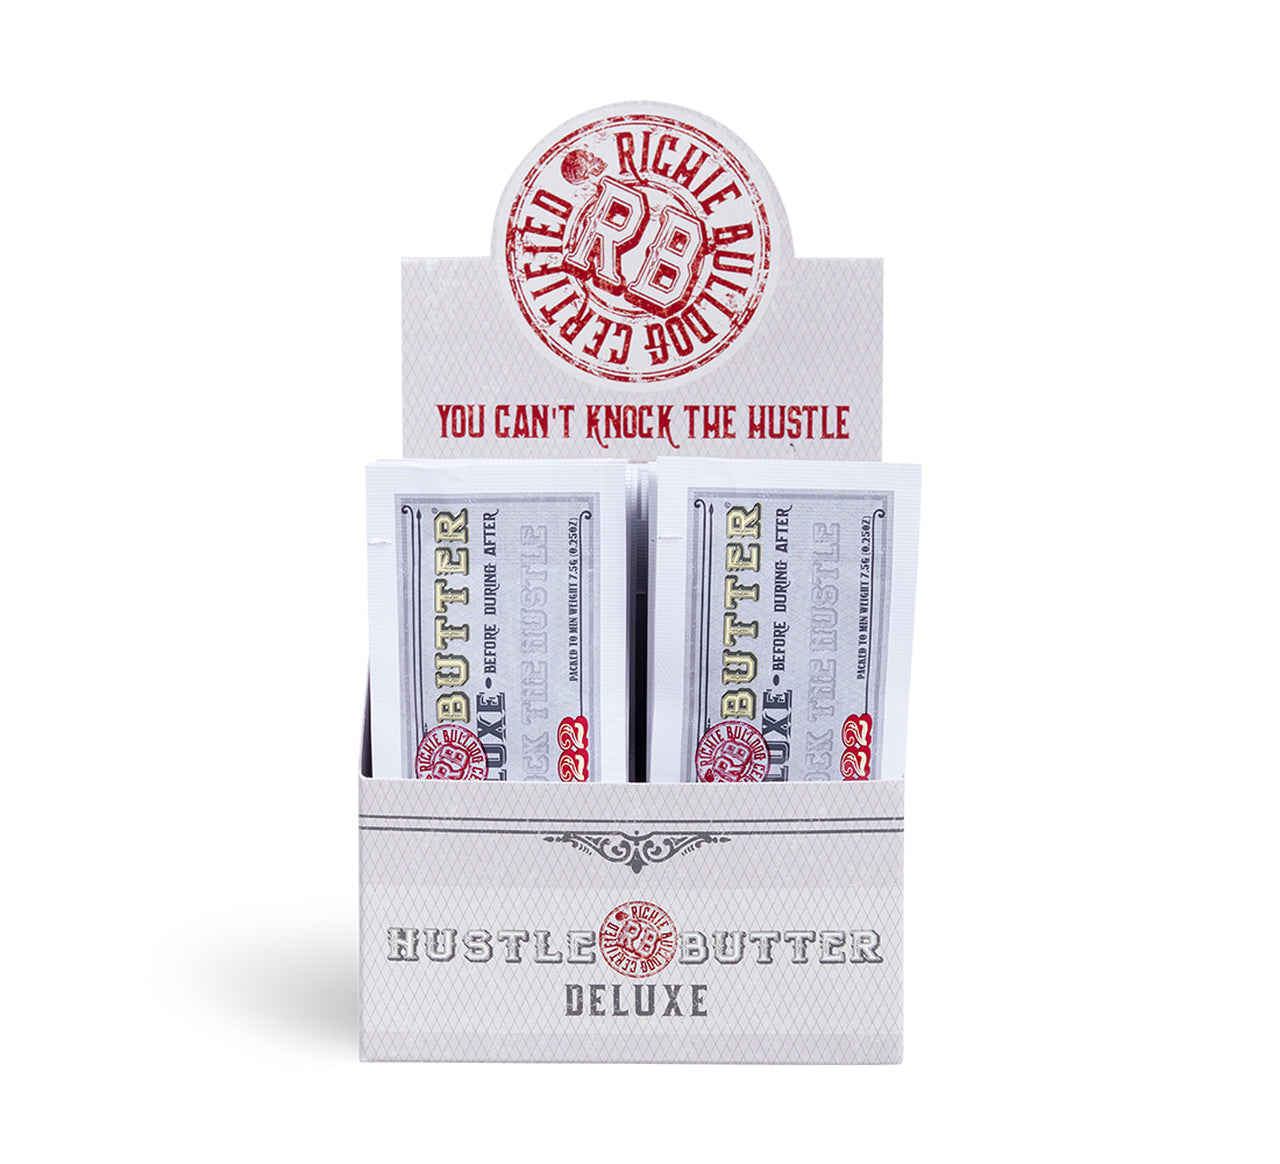 HUSTLE BUTTER DELUXE PACKETTE - 0.25 fl oz container